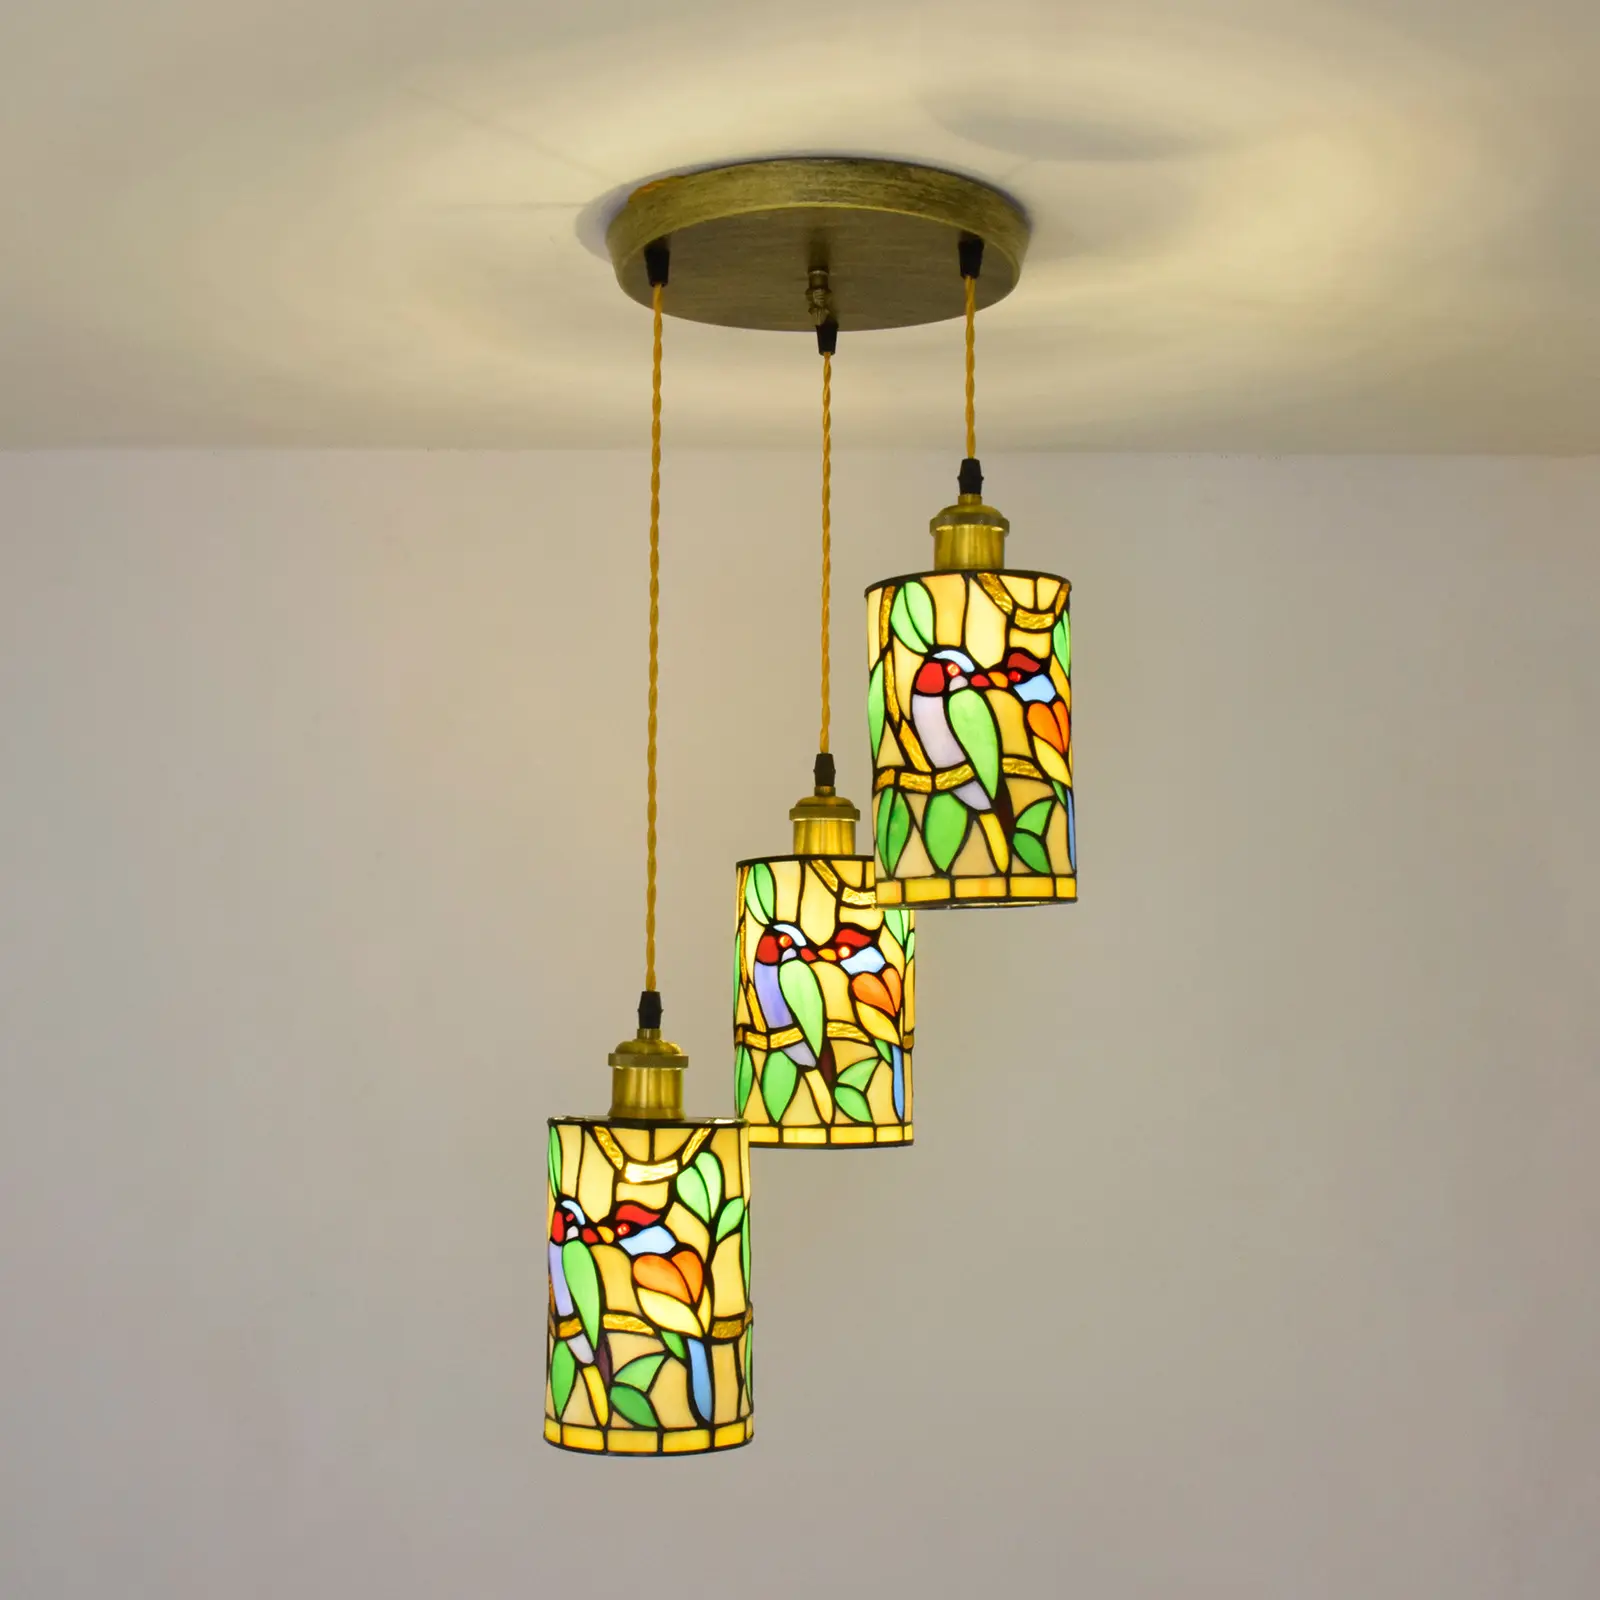 D205 Farmhouse chandelier 3 Head parrot Stained Glass Tiffany room Hanging Light colorful Pendant Light restaurant chandelier